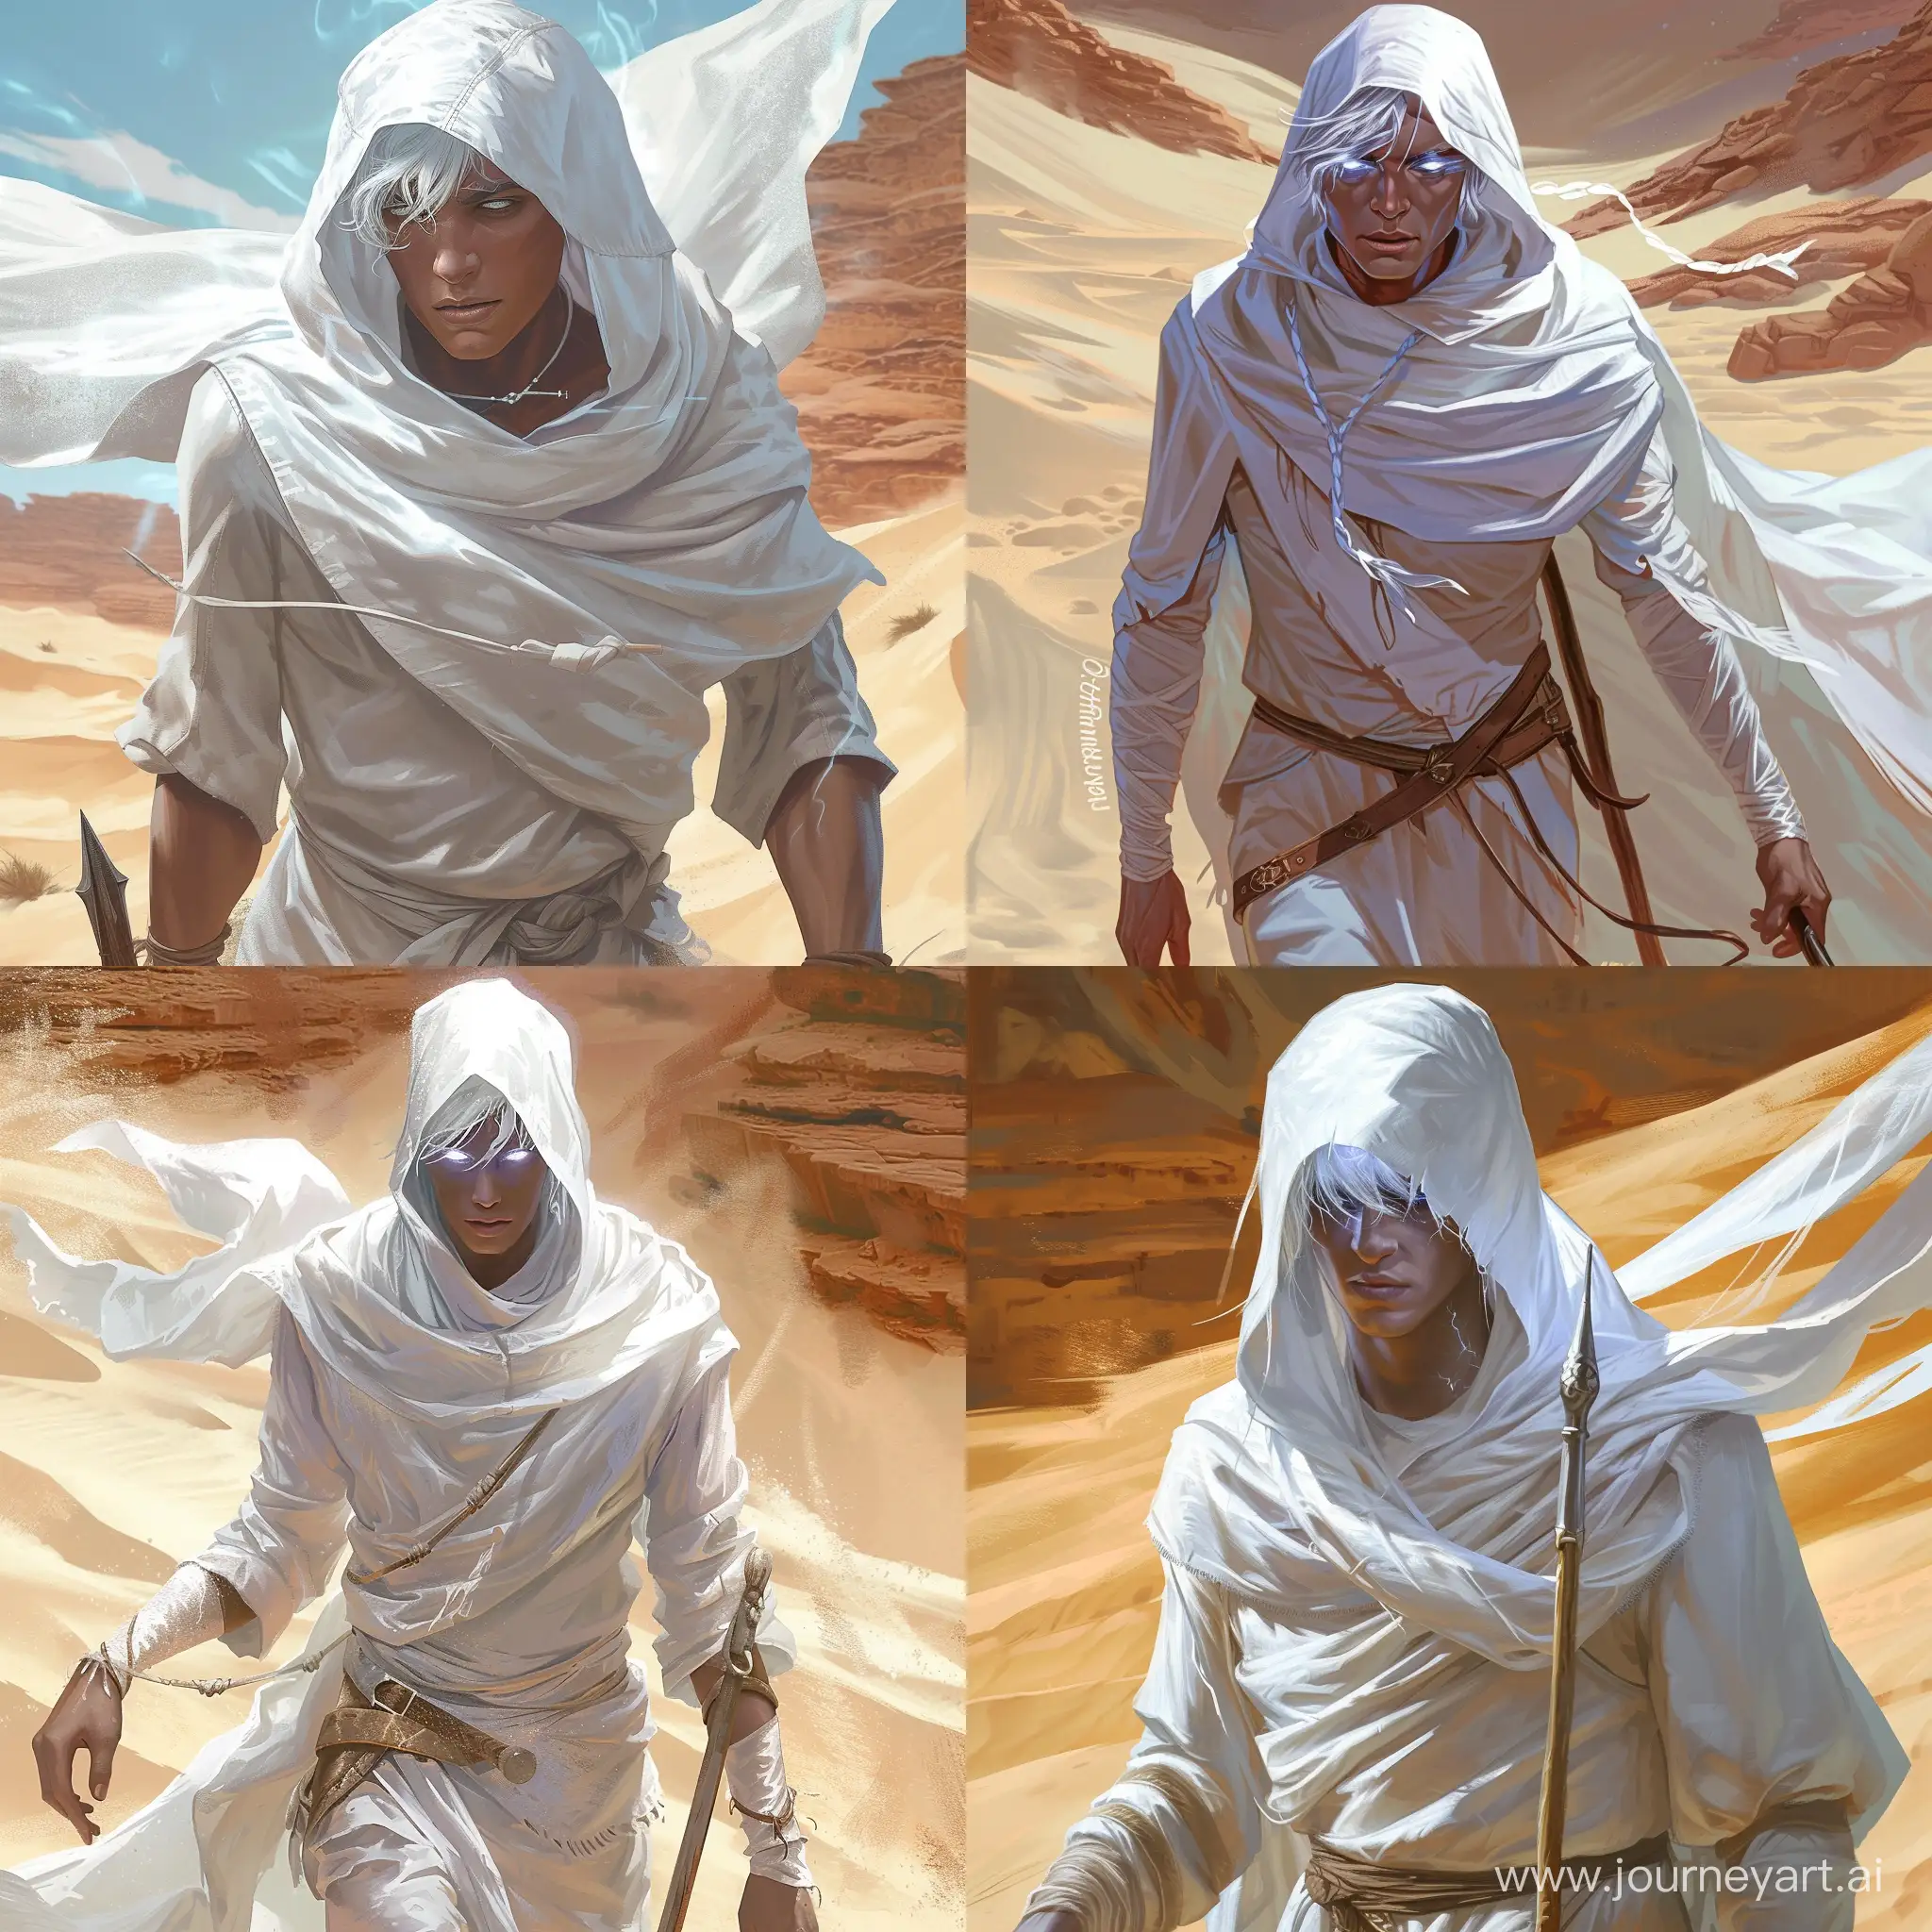 Draw a character from the Dungeons and Dragons universe according to the following description: He is a tall male changeling dressed in white travelling clothes. His head with silver hair is covered with a white hood, his ashen-white young face is clean shaven with a kind faint smile, his eyes shimmer with white light. He is making his way through the desert with a walking stick in his hand.